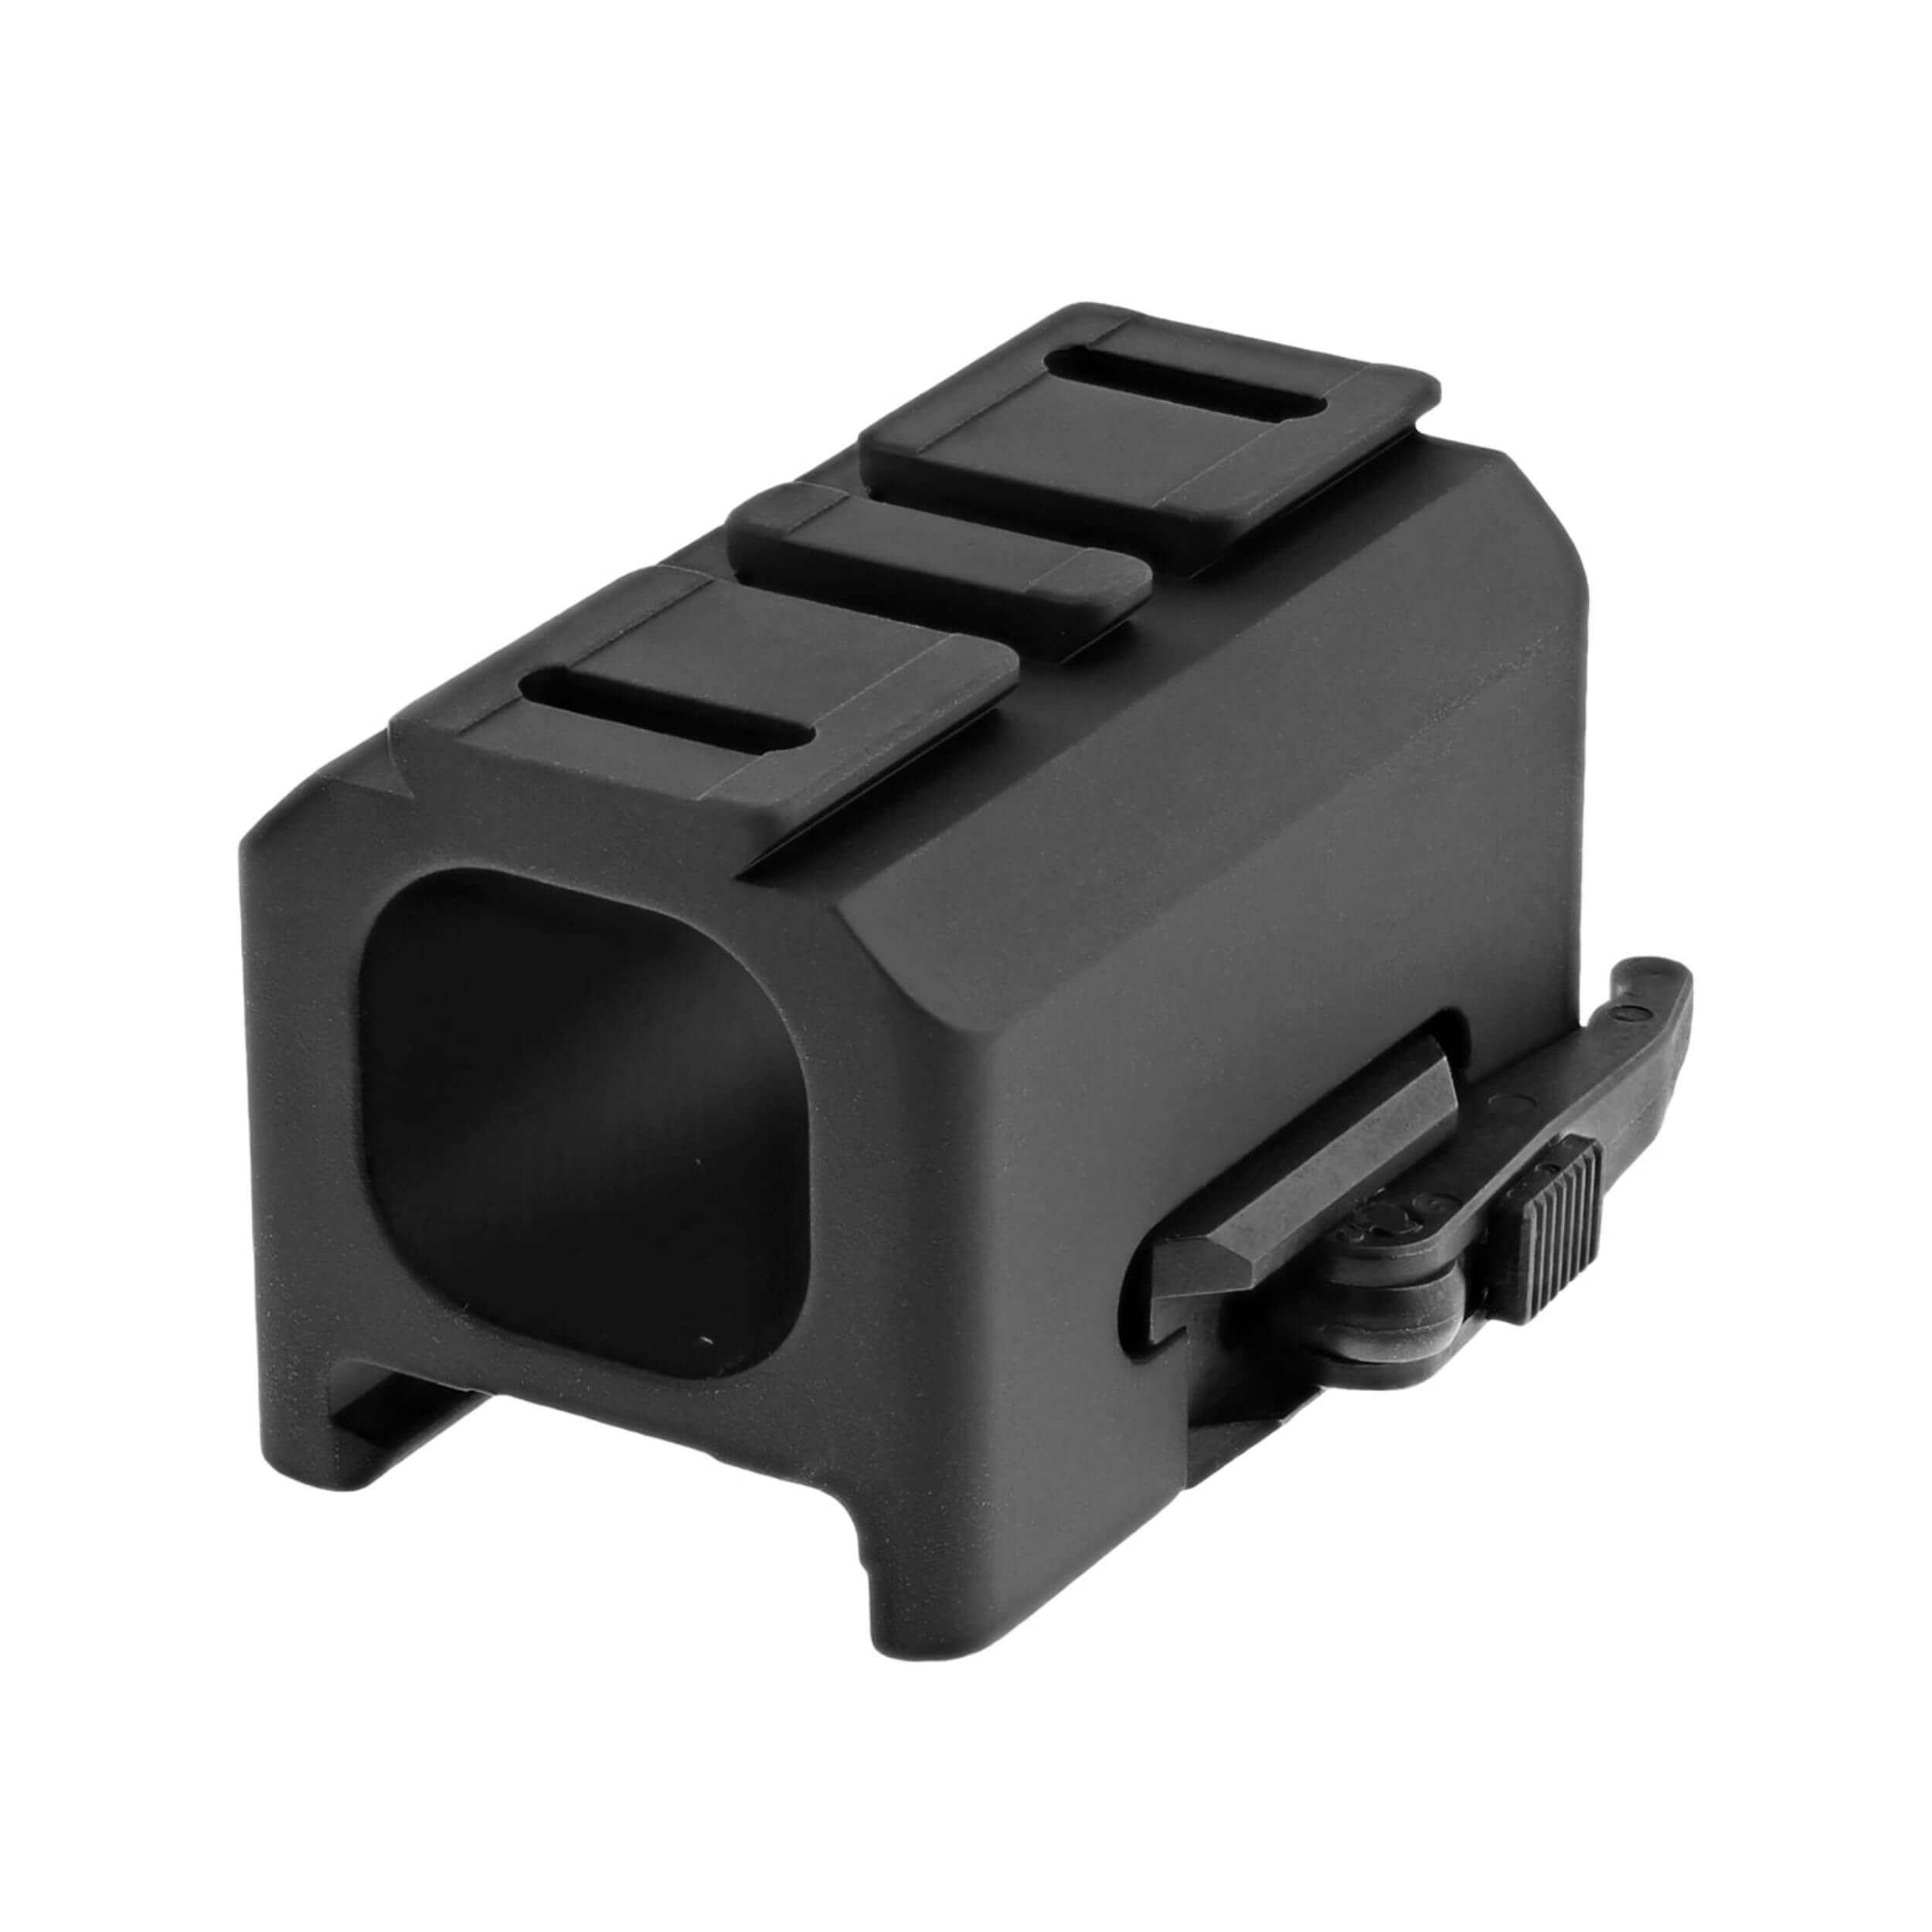 Aimpoint ACRO mount - 39mm hight